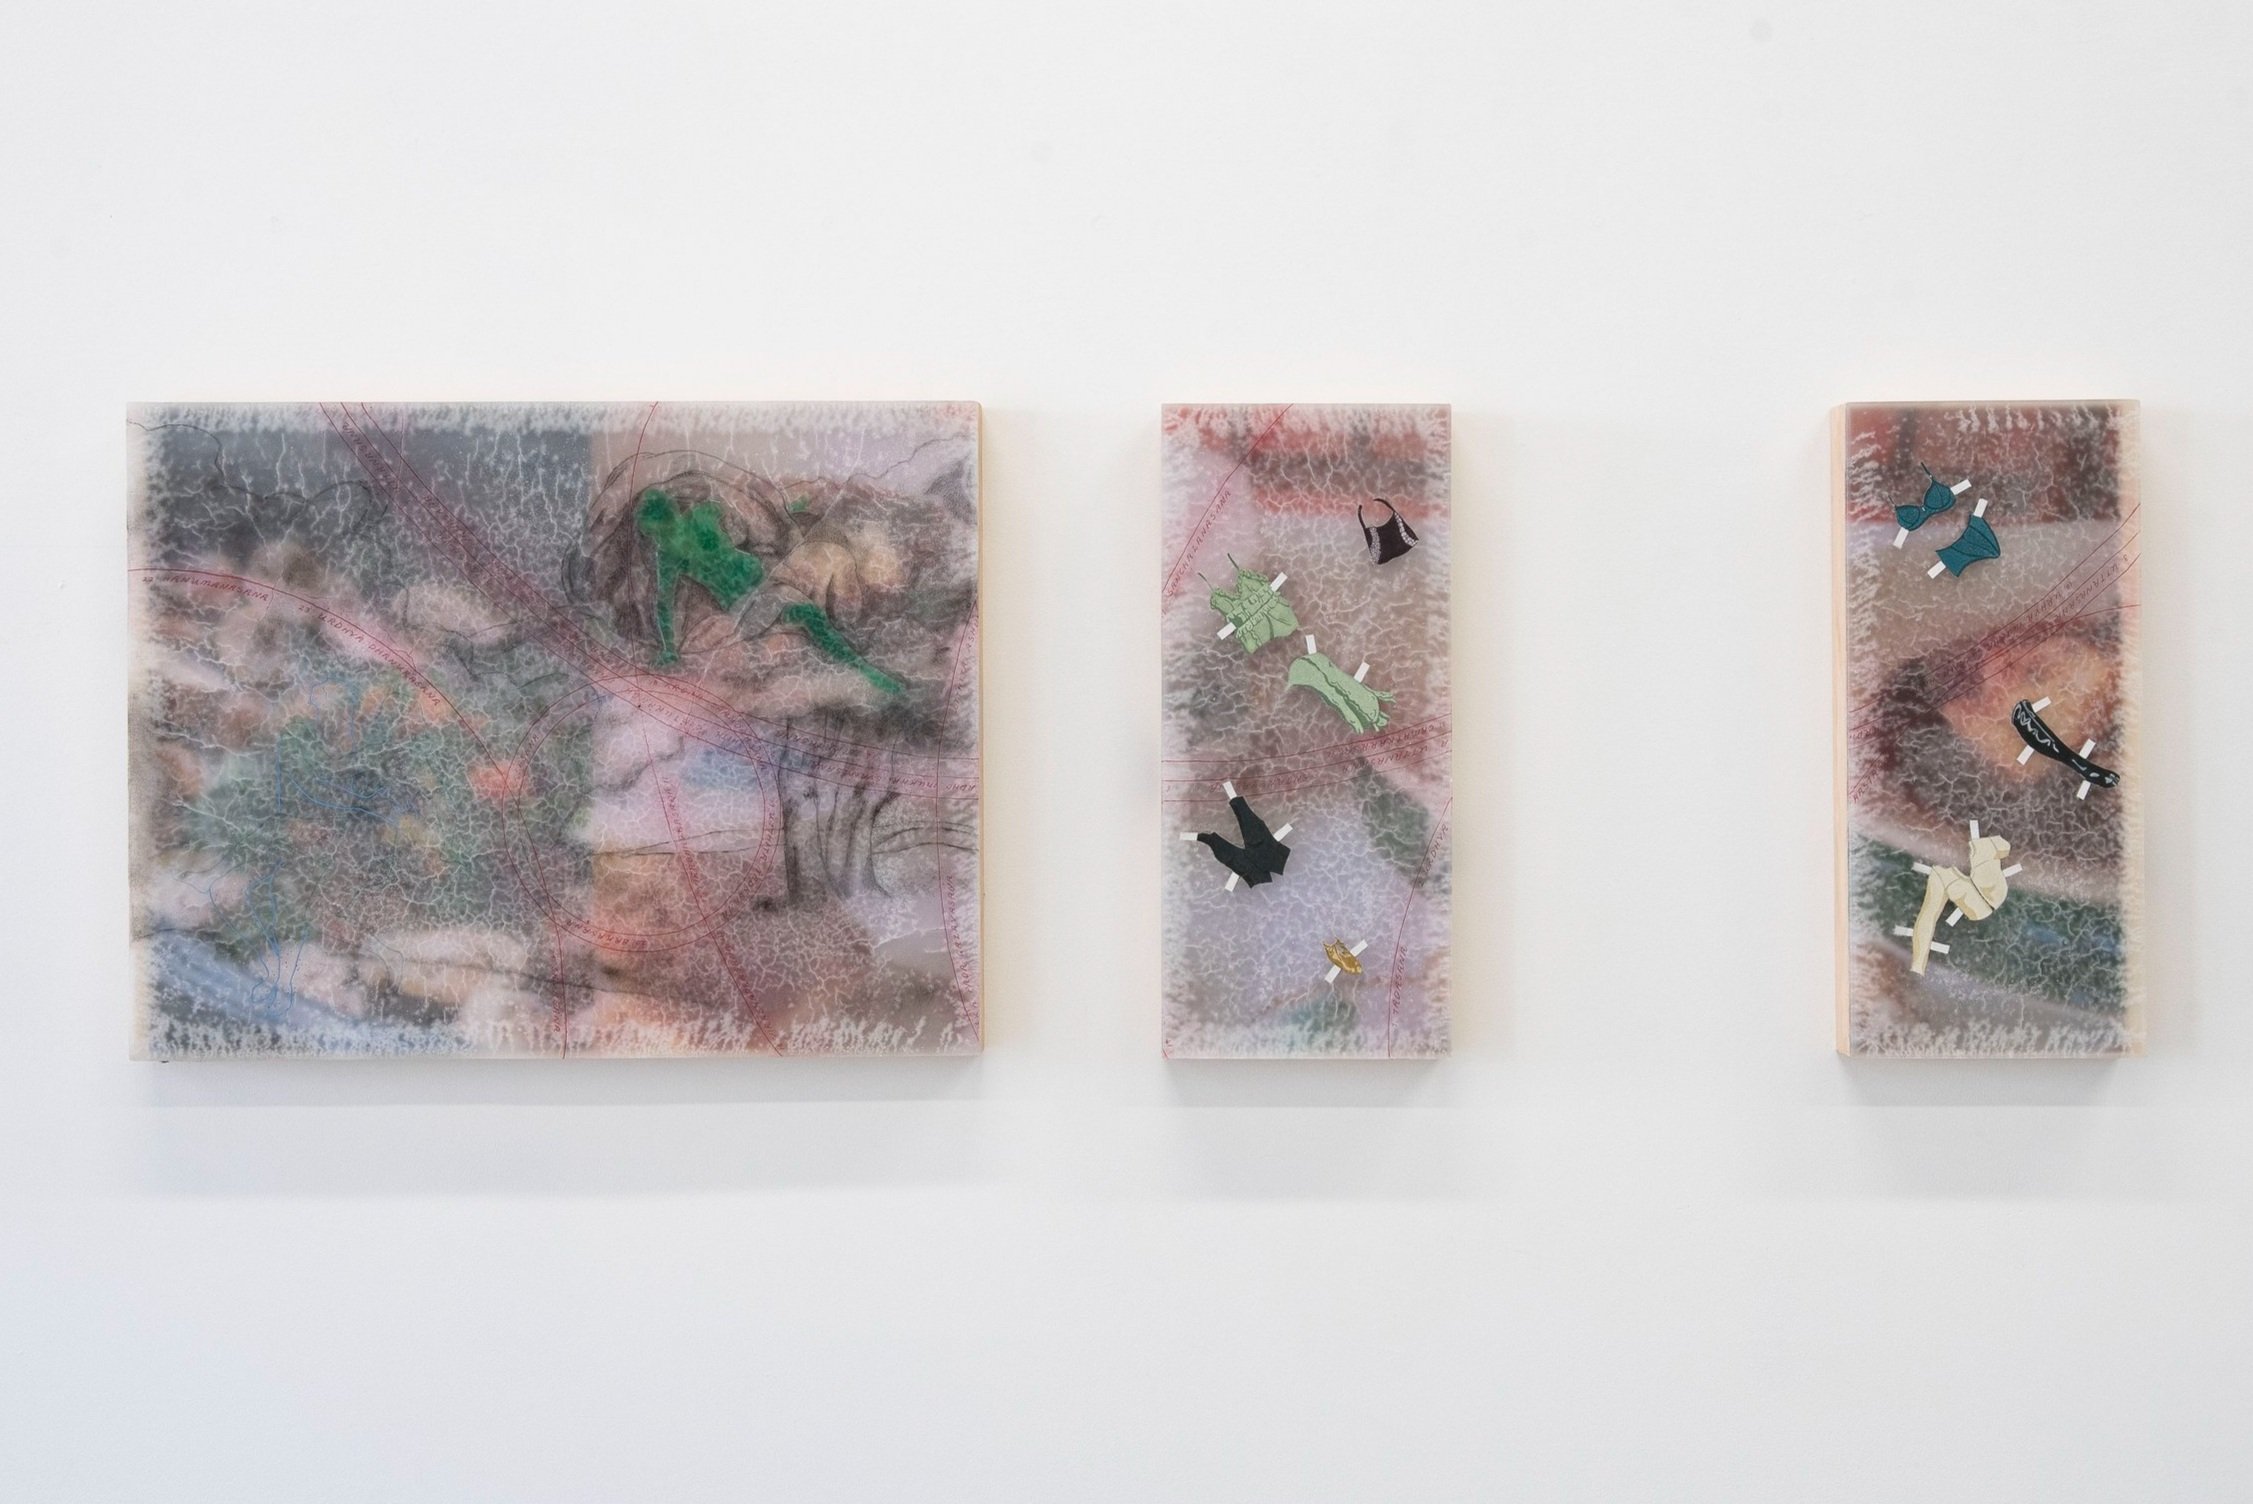   Hera as Untouchable Elegance , 2021   Triptych - paraffin wax, resin, oil paint, paper, canvas, found objects on plywood and pine cradle frame.   Left panel measures 51.5 x 40 x 4 cm; two right panels measure 17.7 x 40 x 4 cm.    Image courtesy of 